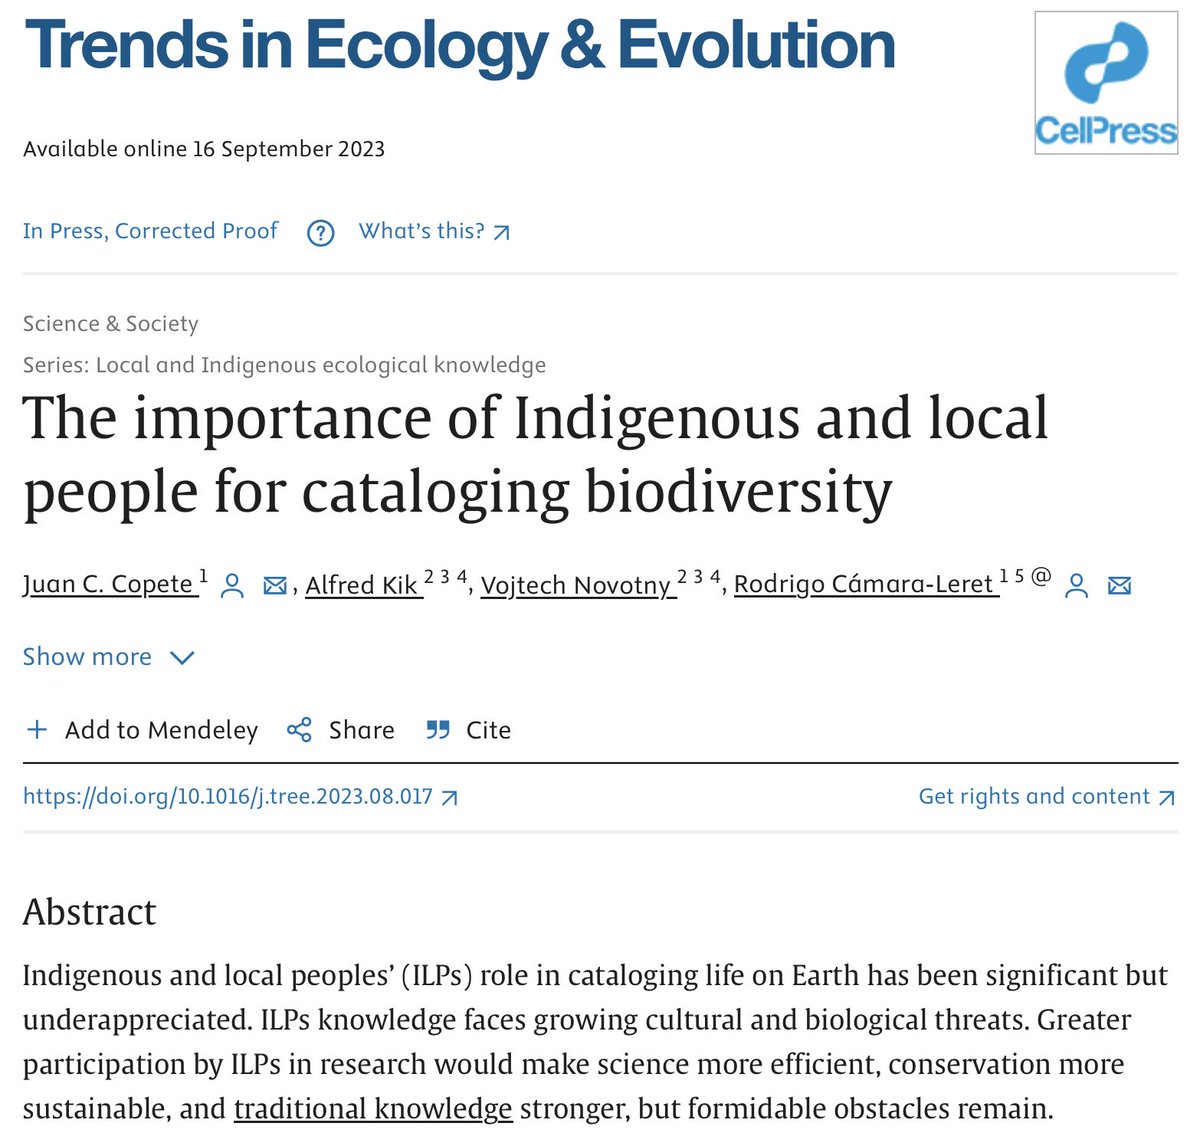 New paper product of a wonderful teamwork @jccopetem @Liklikmasalai @AlfredKik. We review and highlight the importance of Indigenous and local people in cataloging biodiversity on Earth. Thread (1/4) 👇